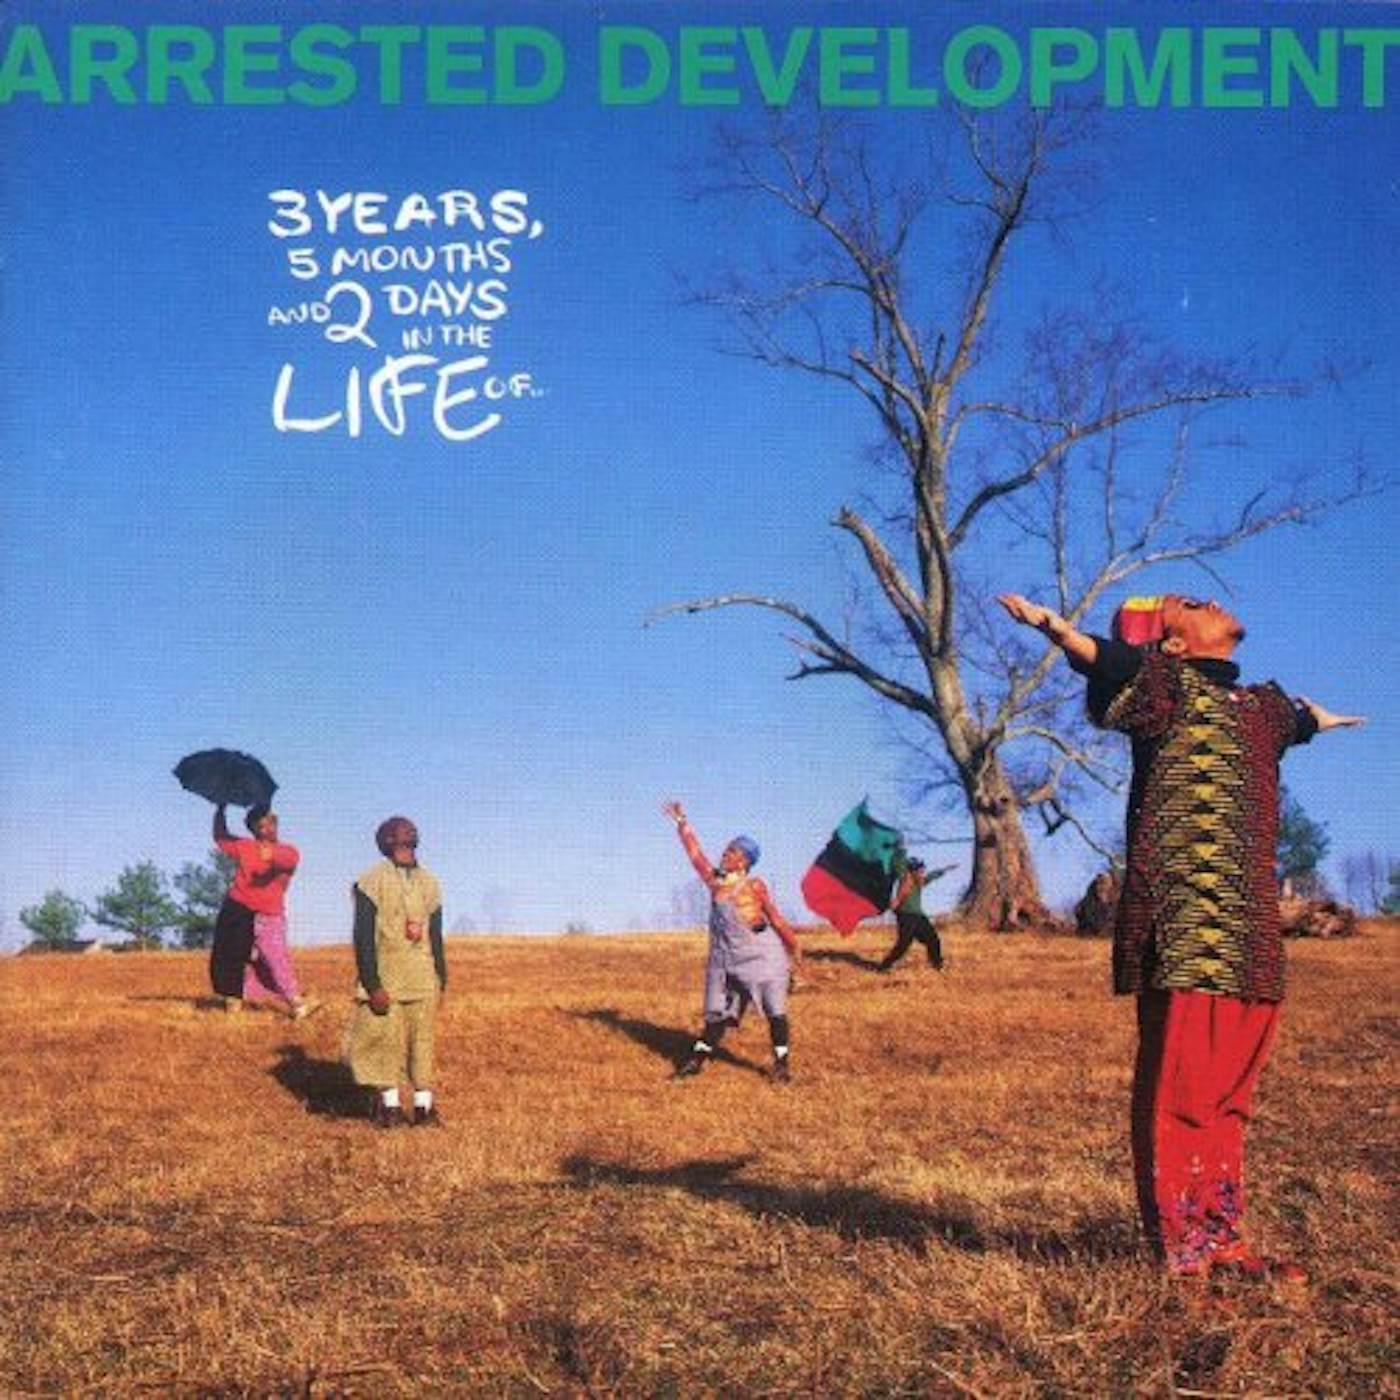 Arrested Development 3 YEARS 5 MONTHS & 2 DAYS IN THE LIFE OF Vinyl Record